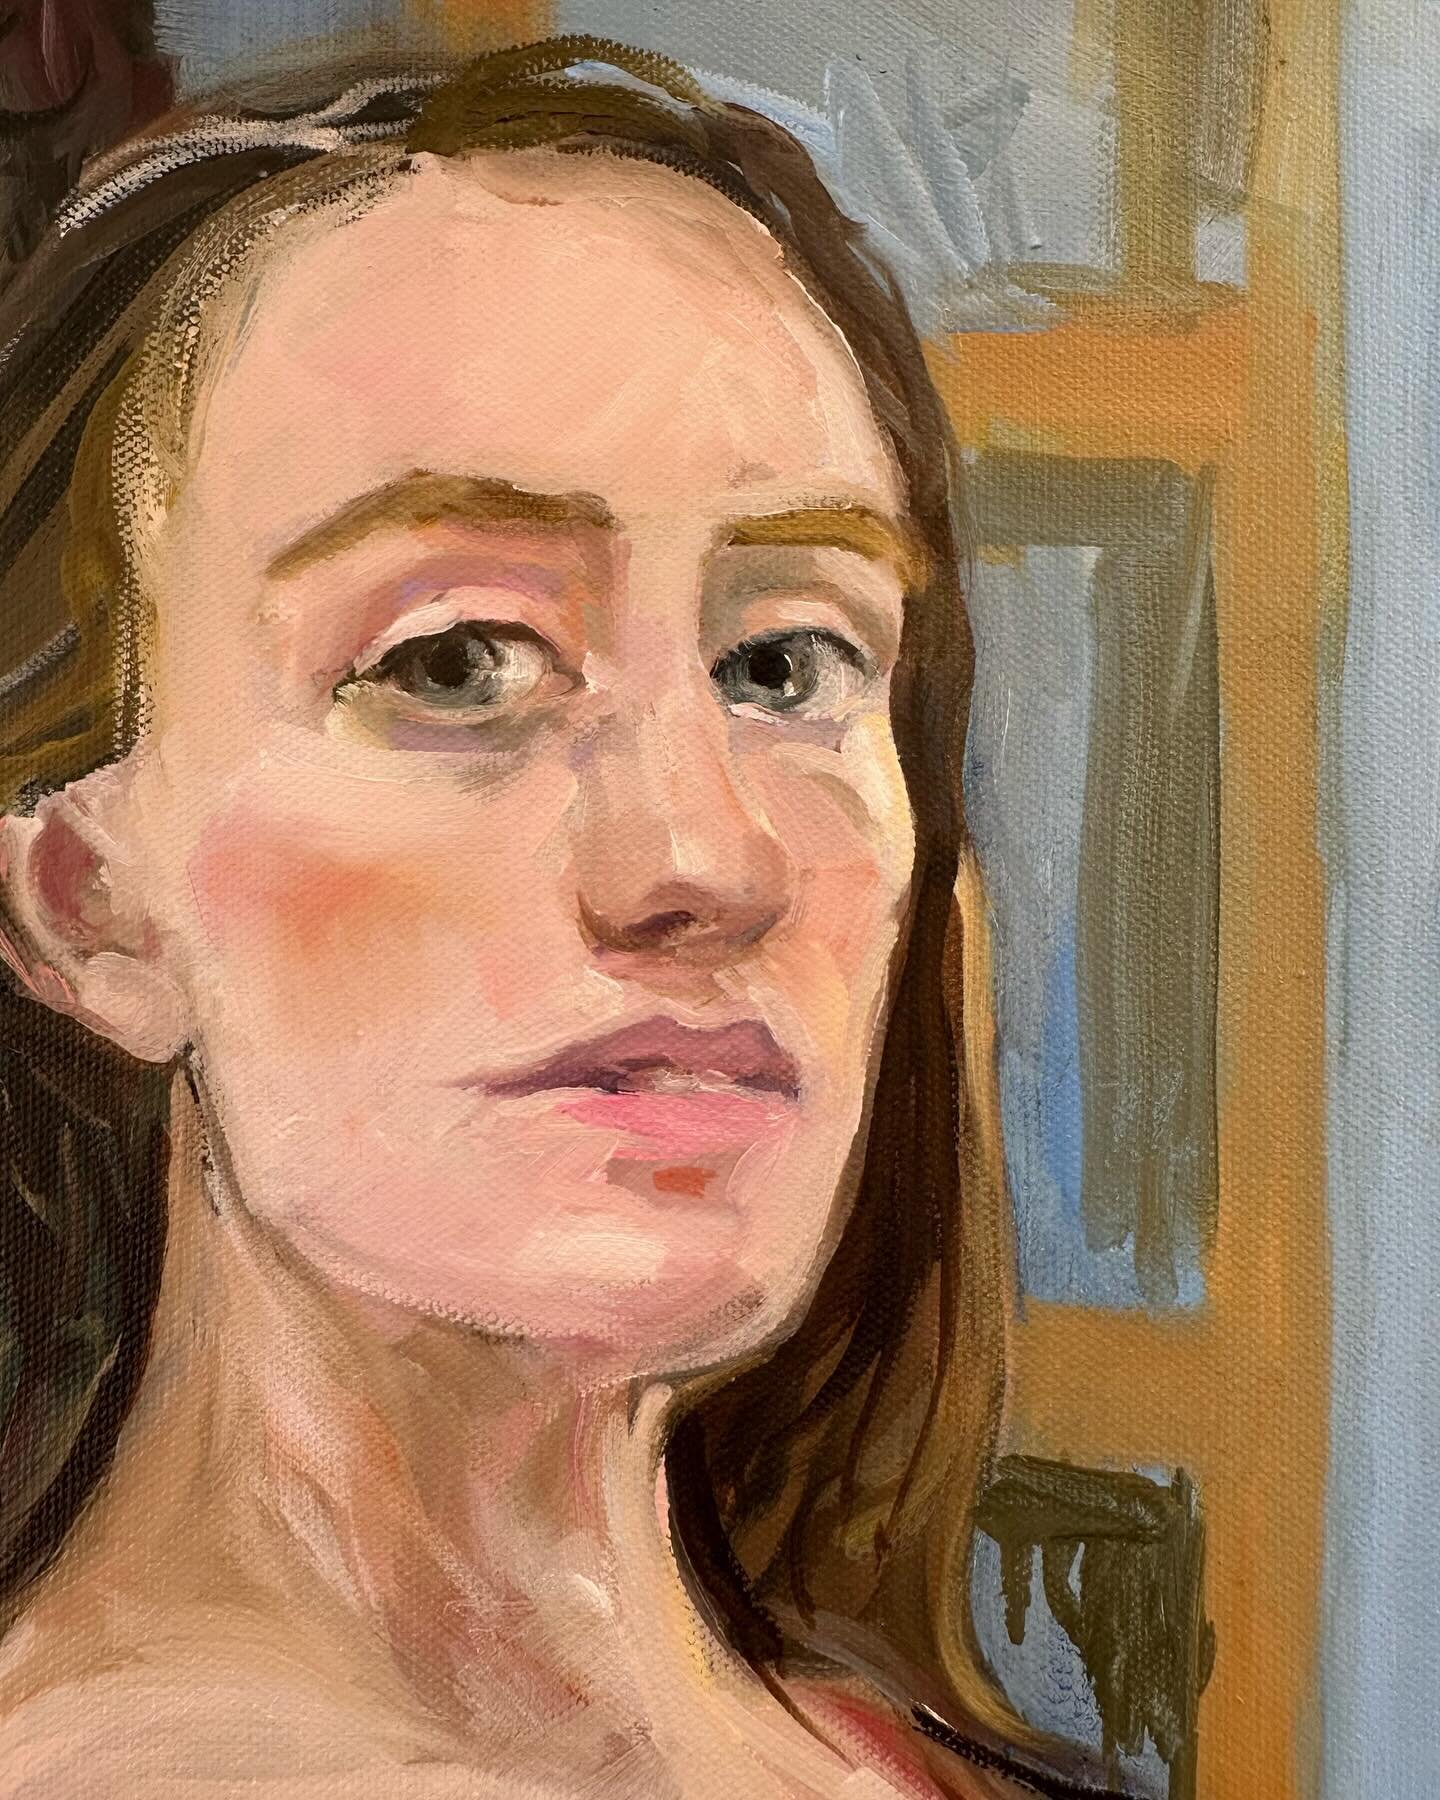 Portrait in progress, #oiloncanvas 
Having a kid turn 26 can sure make a person feel old! When I was your age, you had just learned to speak in sentences, and already had your entire personality: brilliant, tenacious, exacting, funny. You were also t